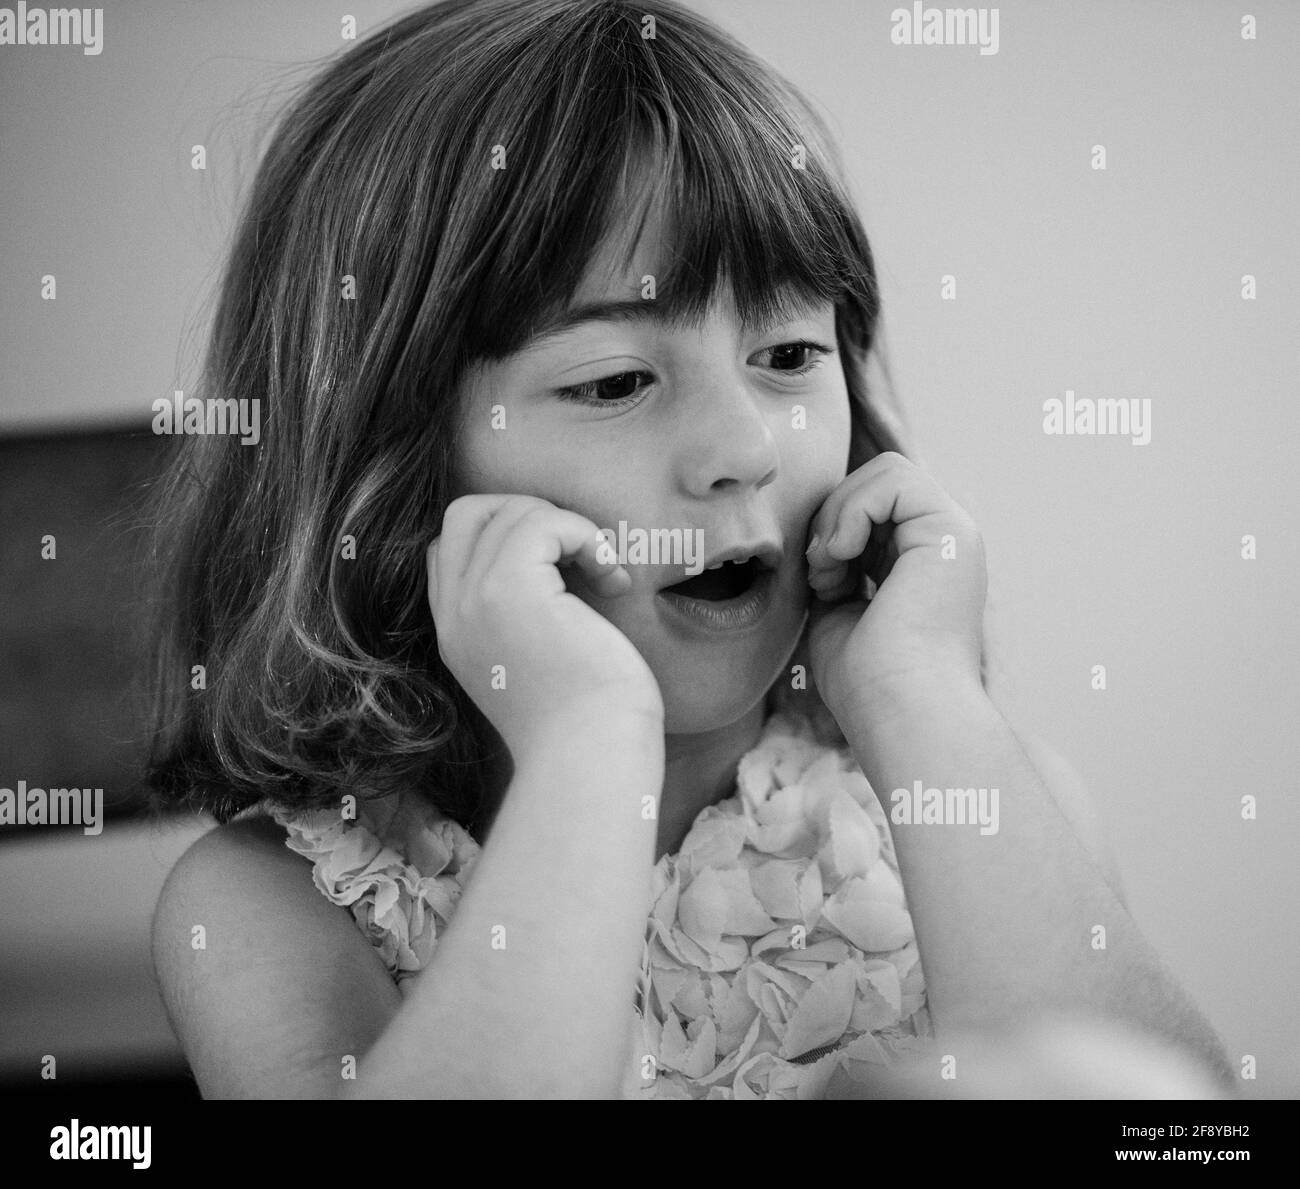 Portrait of girl in black and white Stock Photo